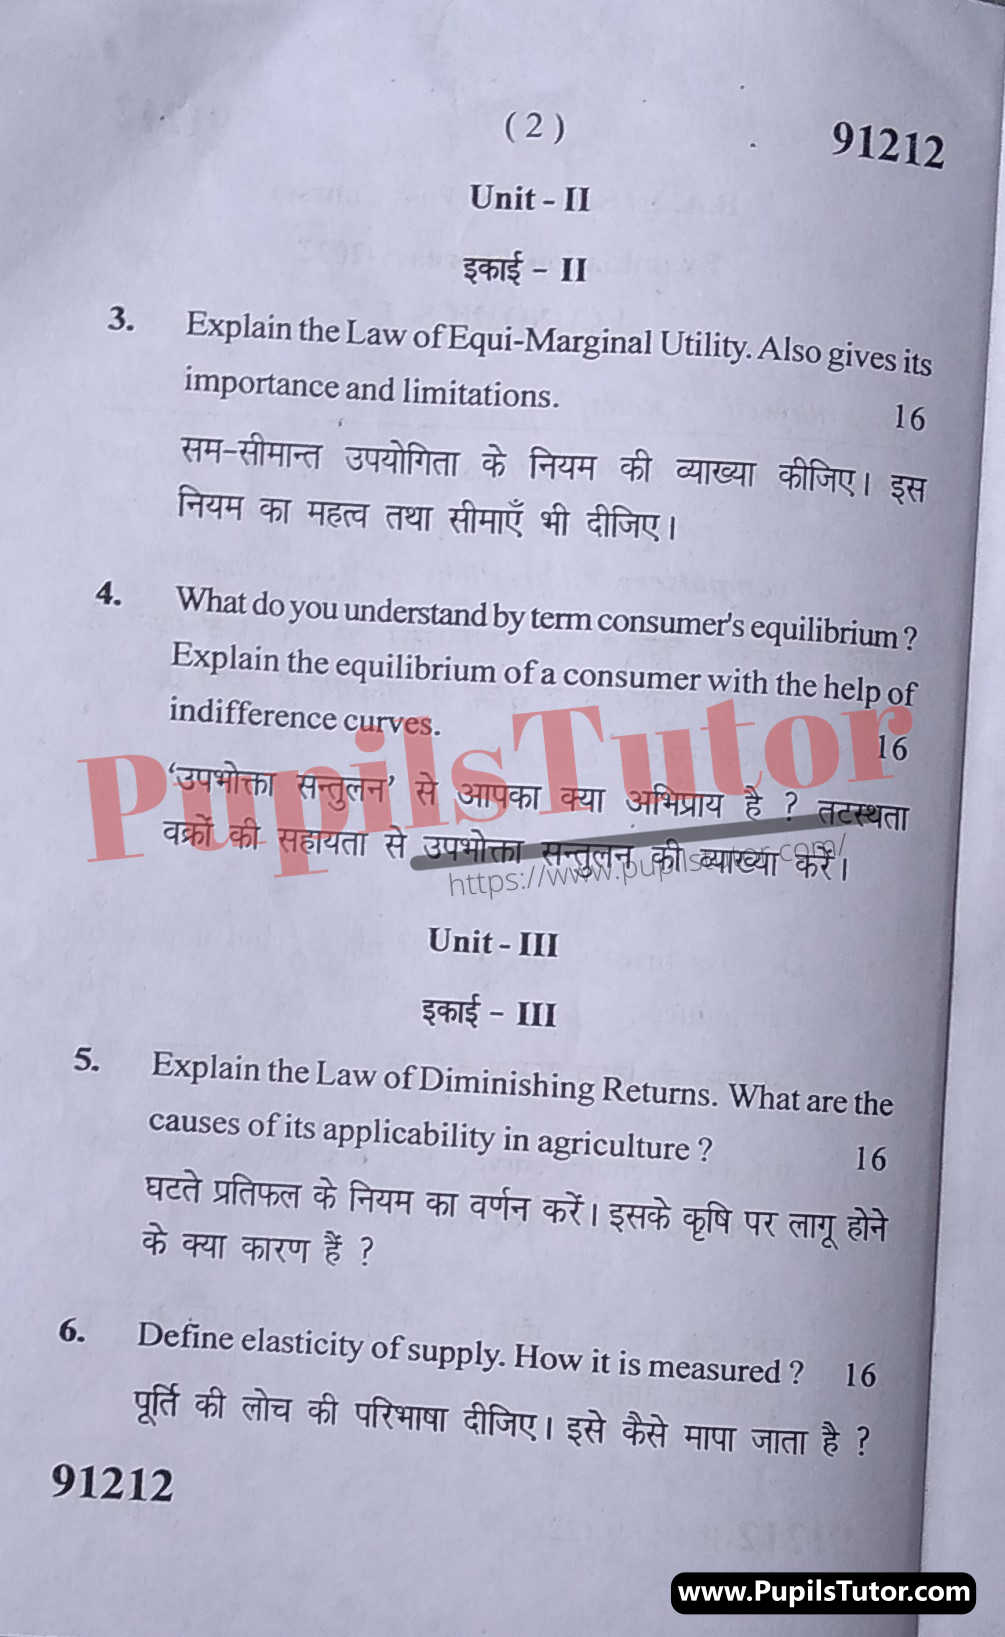 M.D. University B.A. Economics - I First Semester Important Question Answer And Solution - www.pupilstutor.com (Paper Page Number 2)